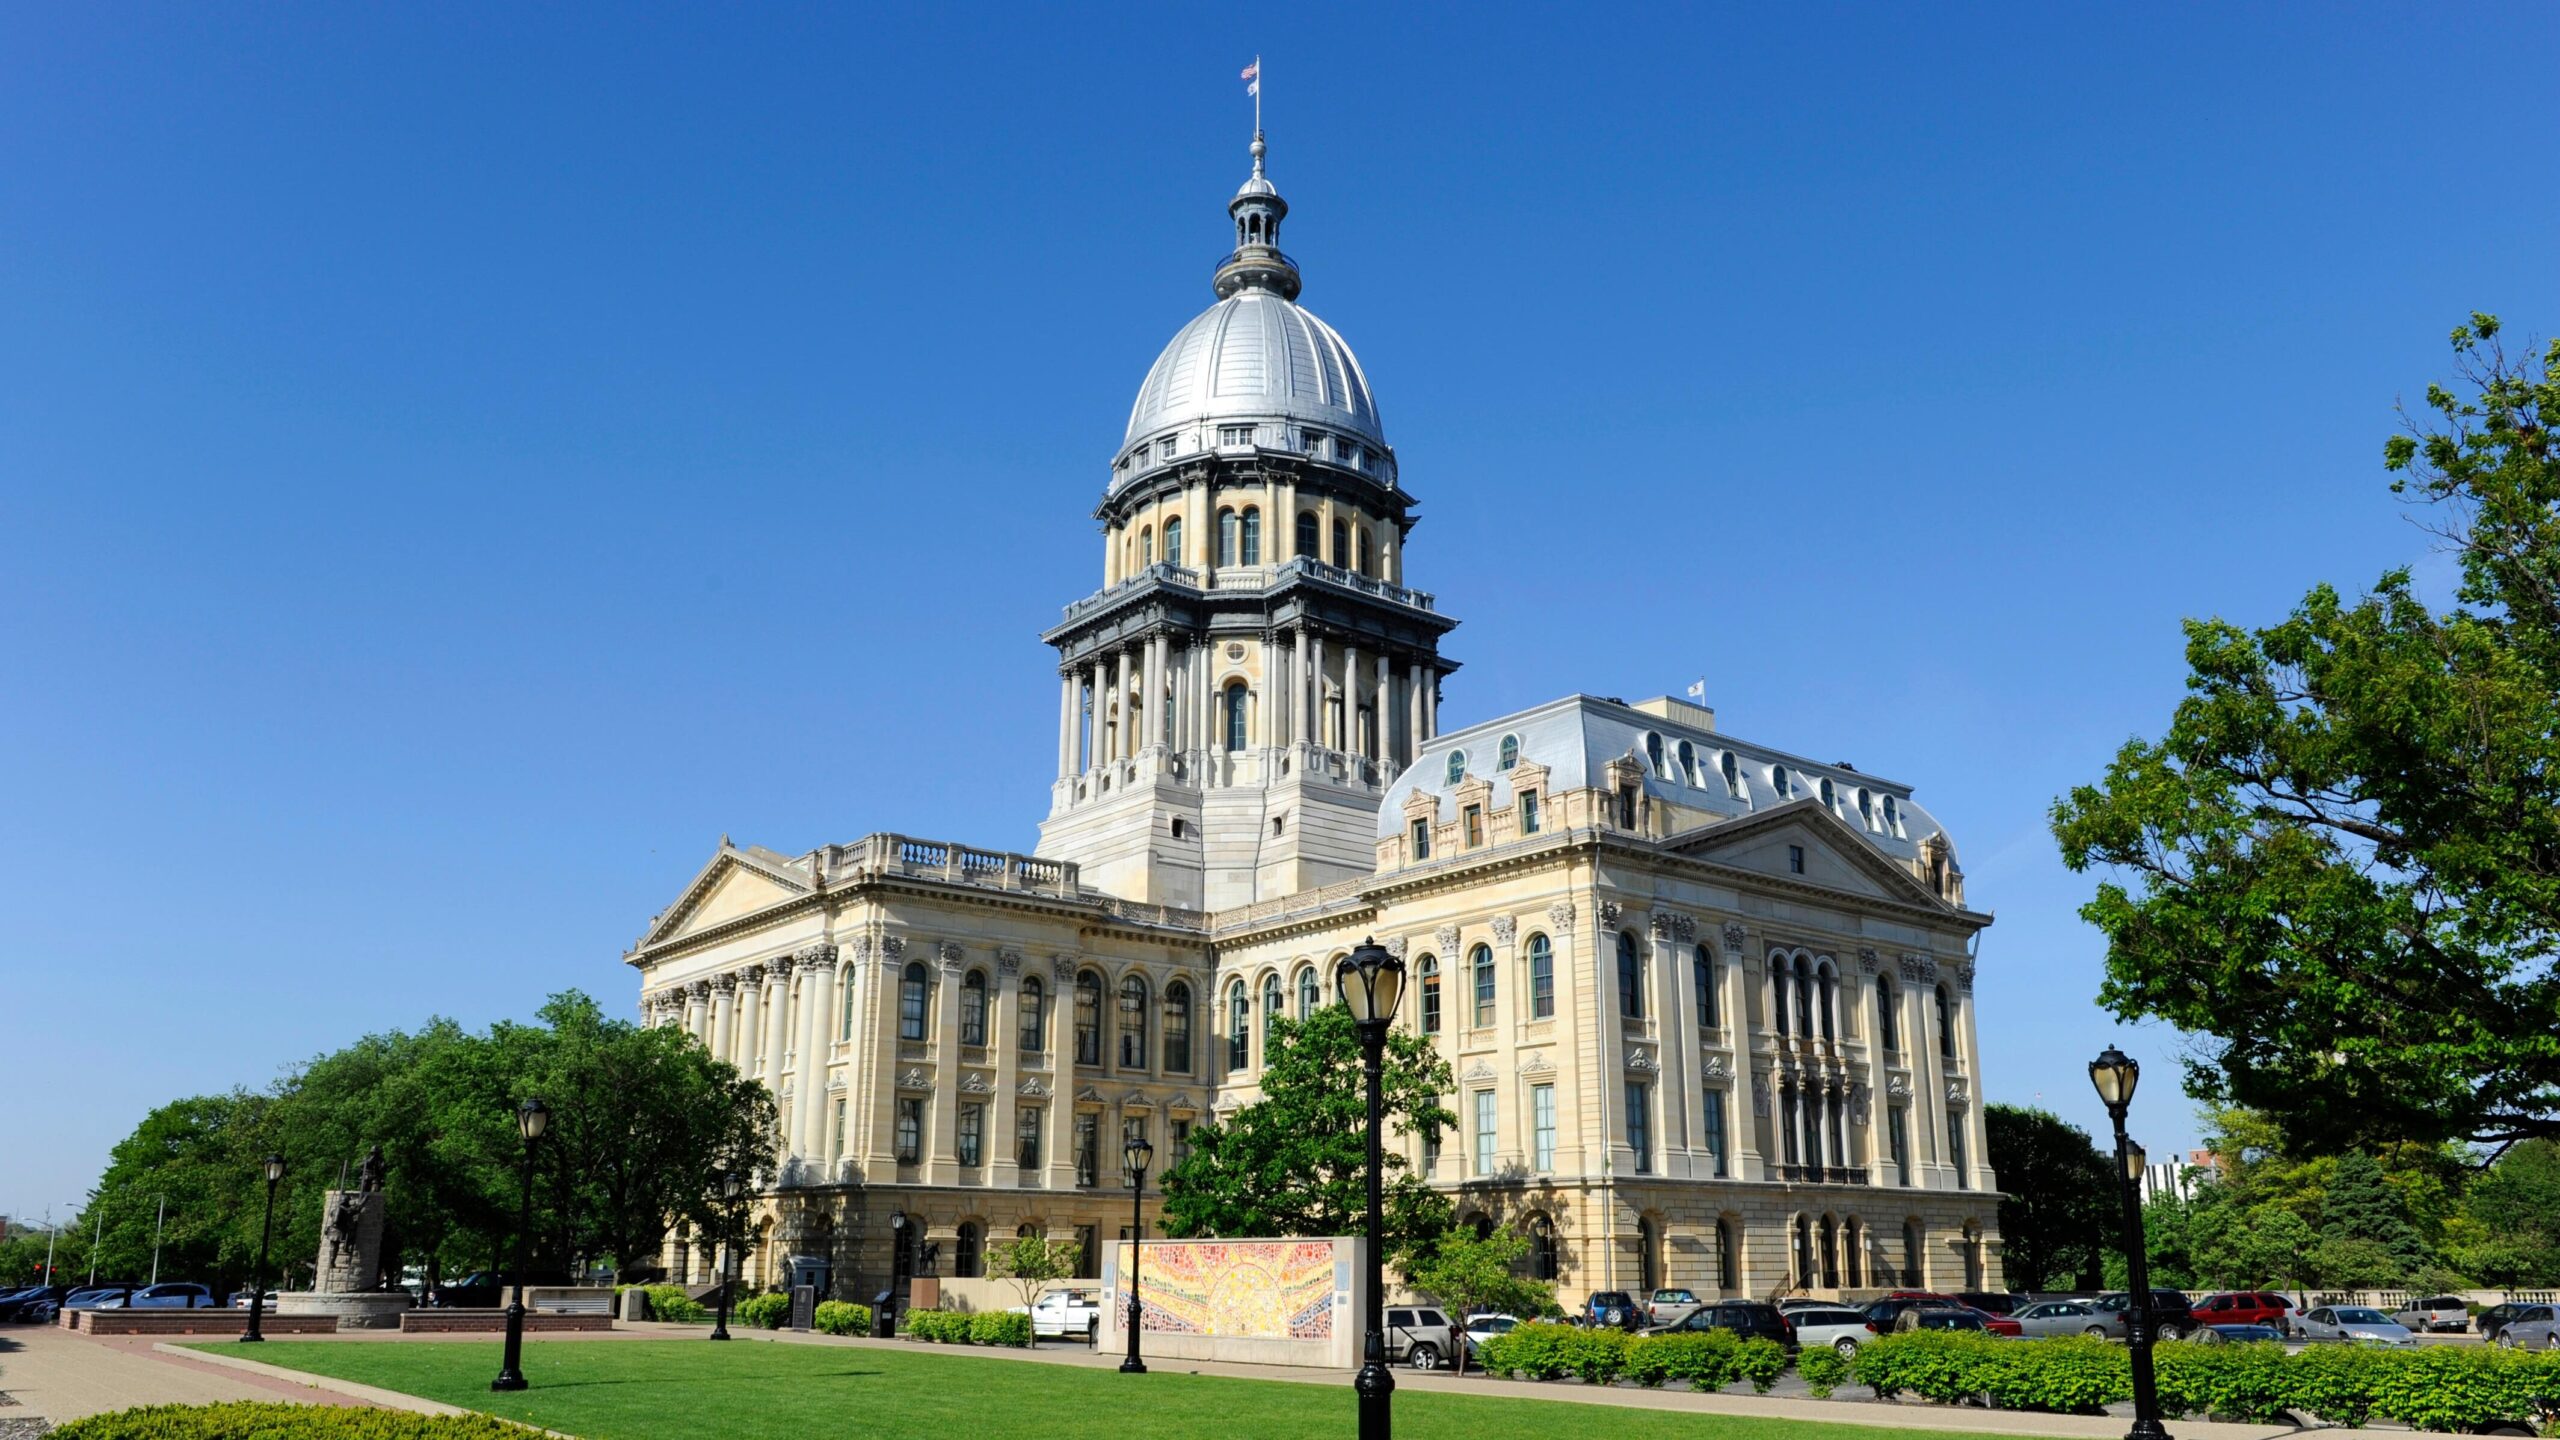 Illinois ranks last for tax friendliness with ‘no end in sight’